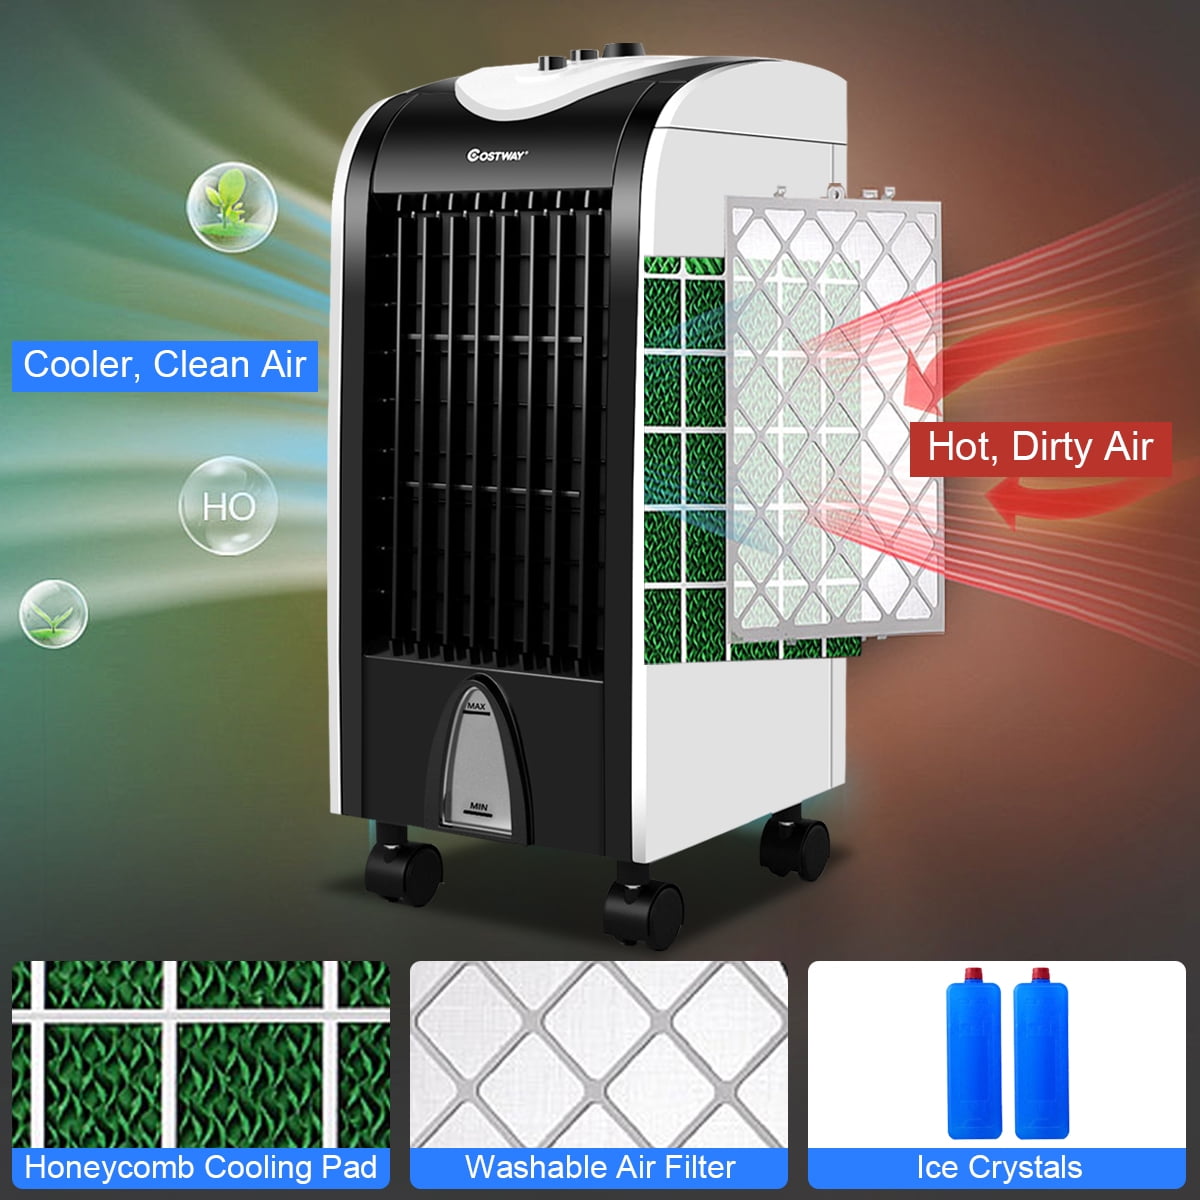 Portable Air Cooler 3 Fan Speeds,GANGELE Personal Mobile Air Cooling Fan for Home Bedroom Office Mini Air Conditioner Cooler and Humidifier,Small Evaporative Coolers Purifier Green 